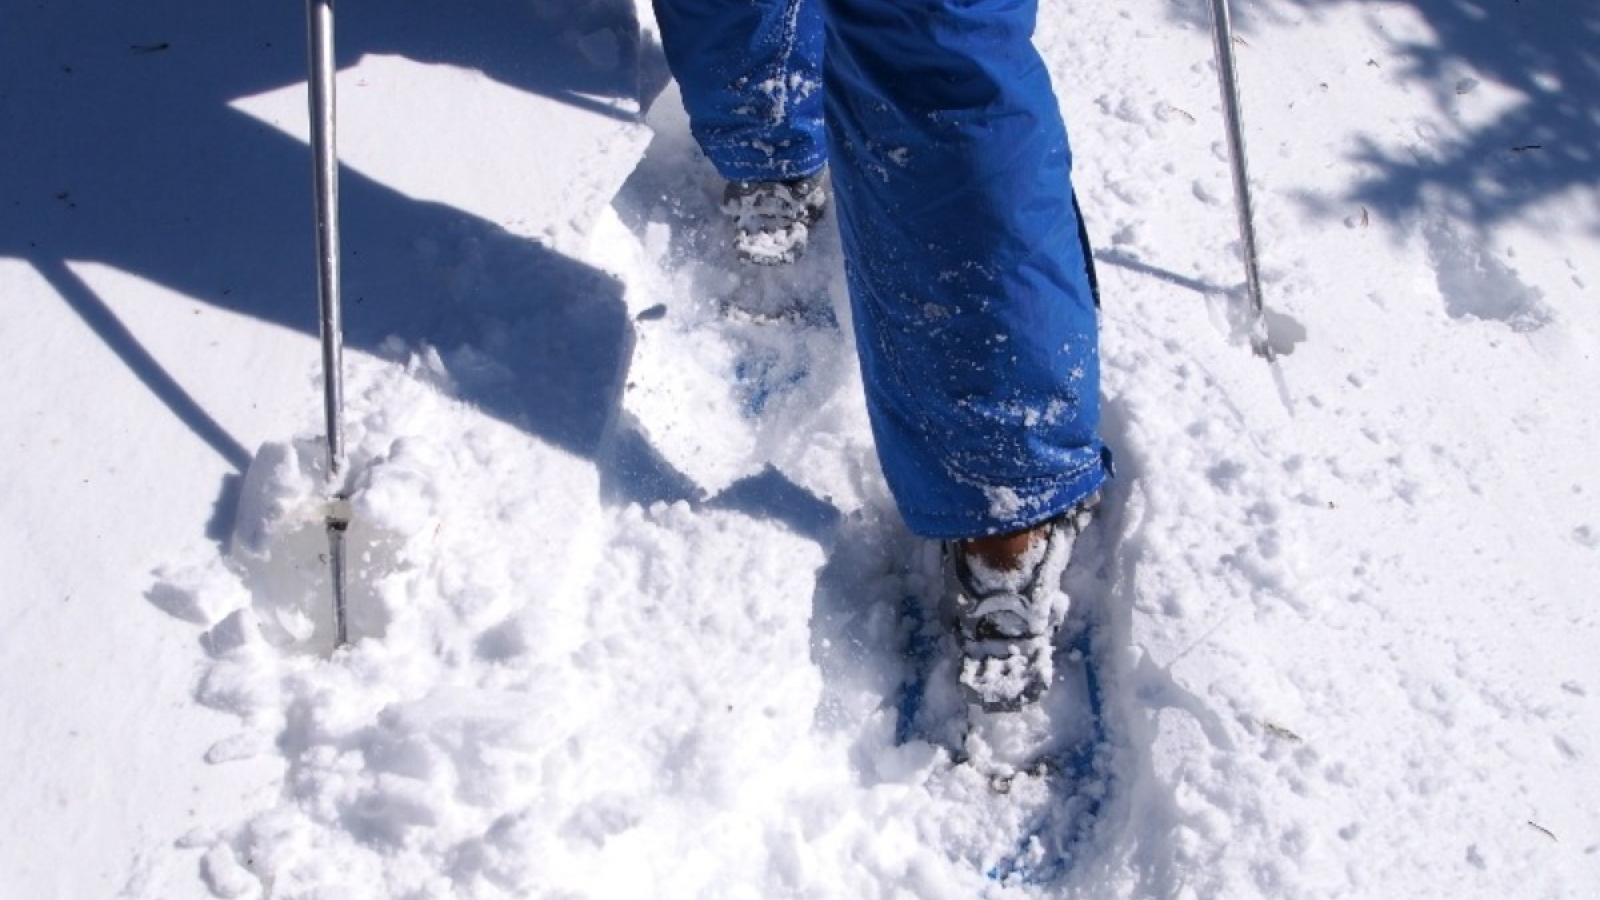 Snowshoeing shoes